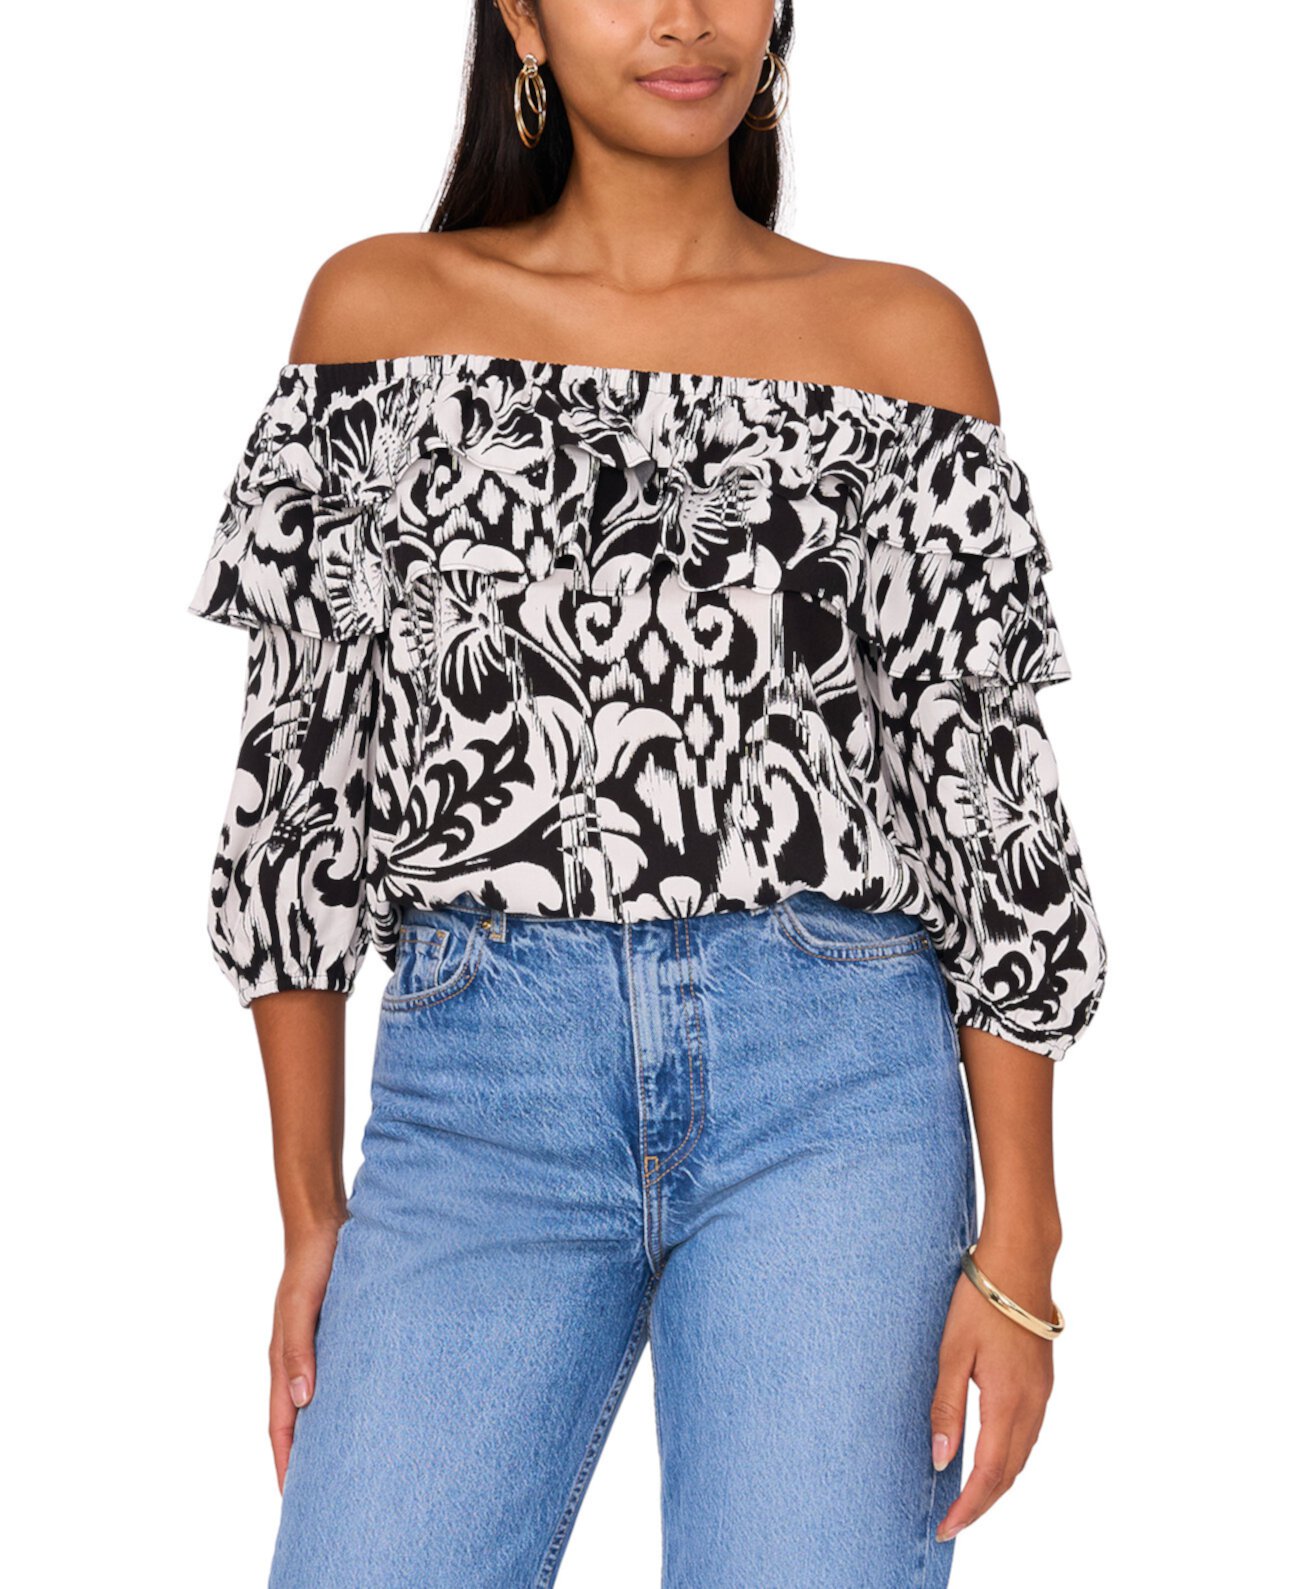 Women's Printed Tiered-Ruffle Off-The-Shoulder Top Sam & Jess